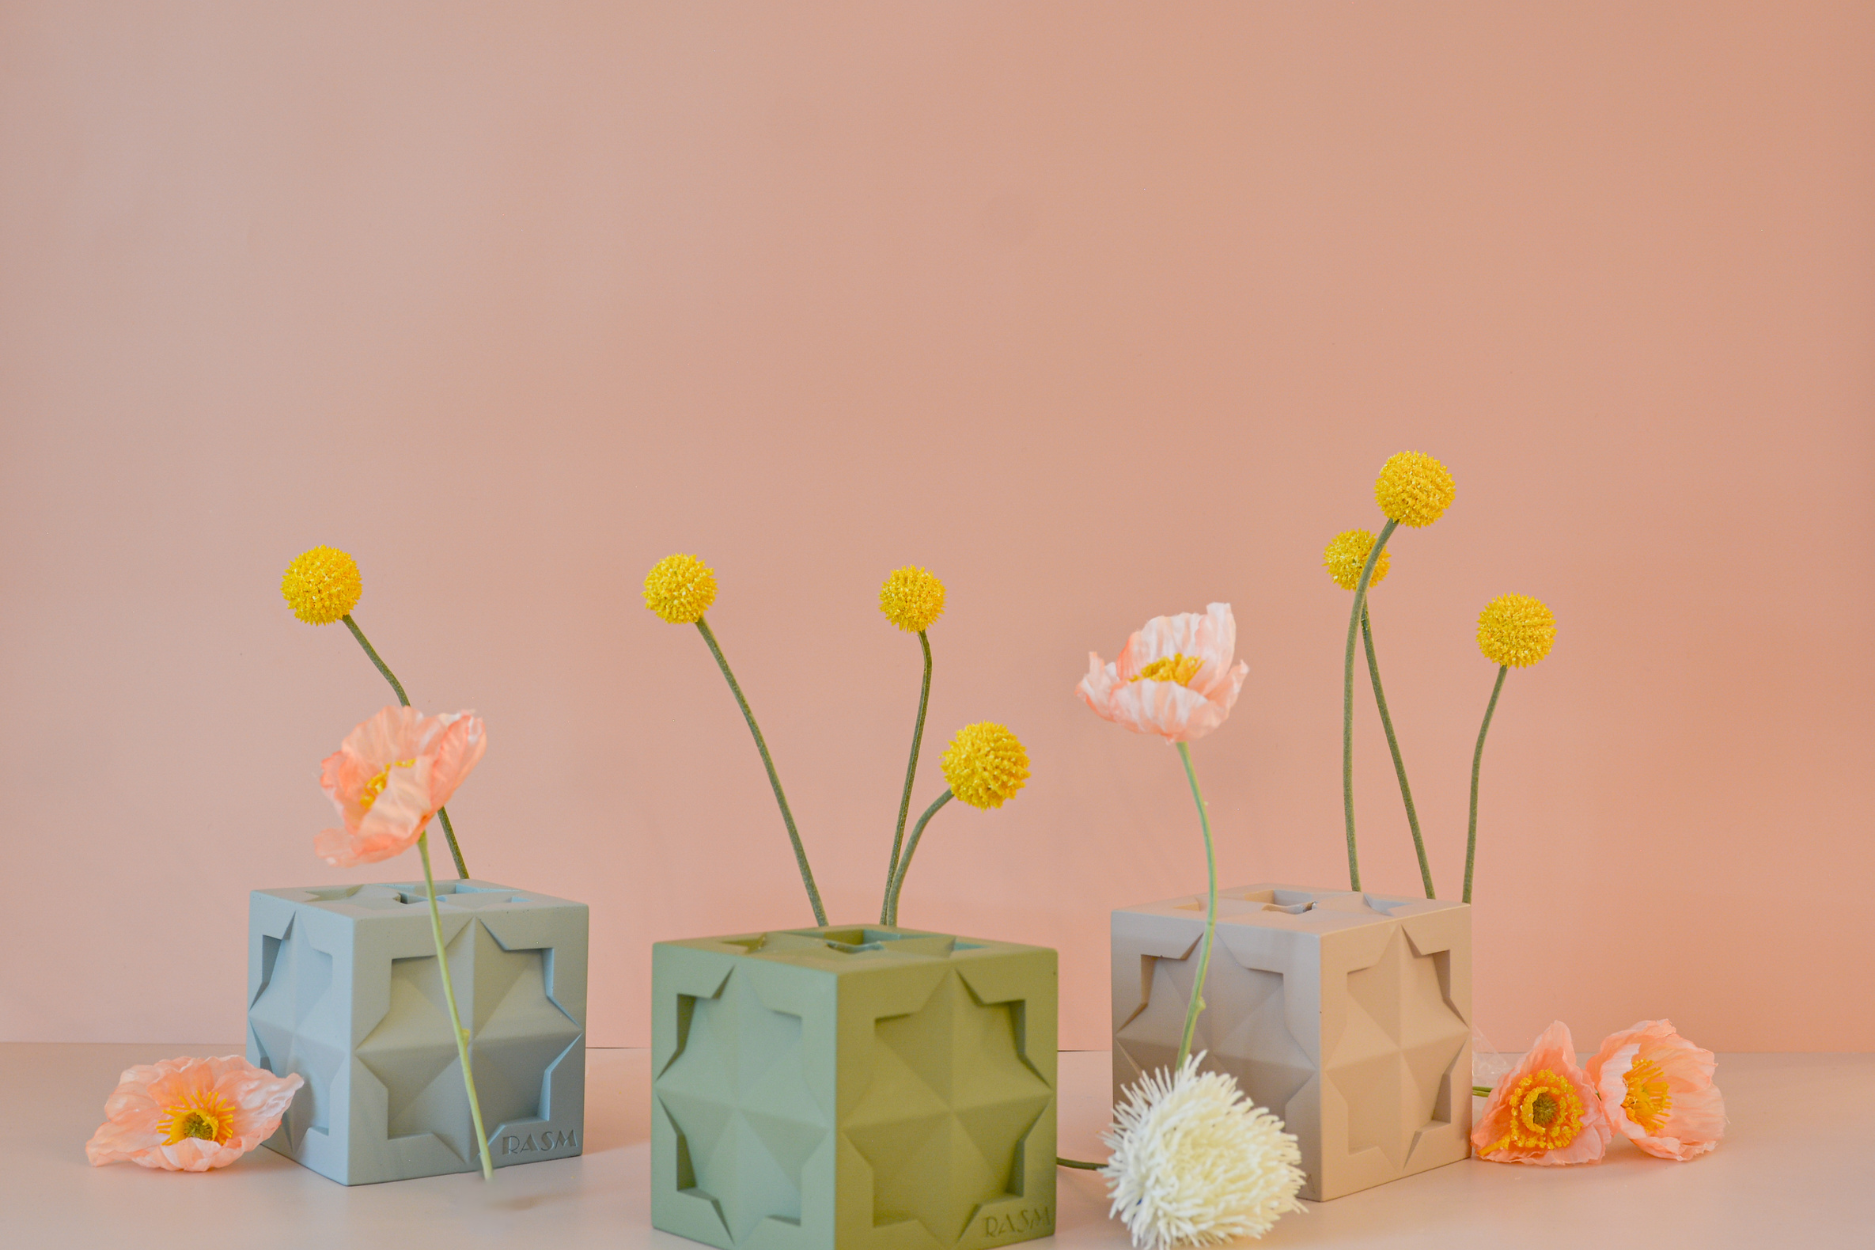 RASM's geometric base candle holders with flowers